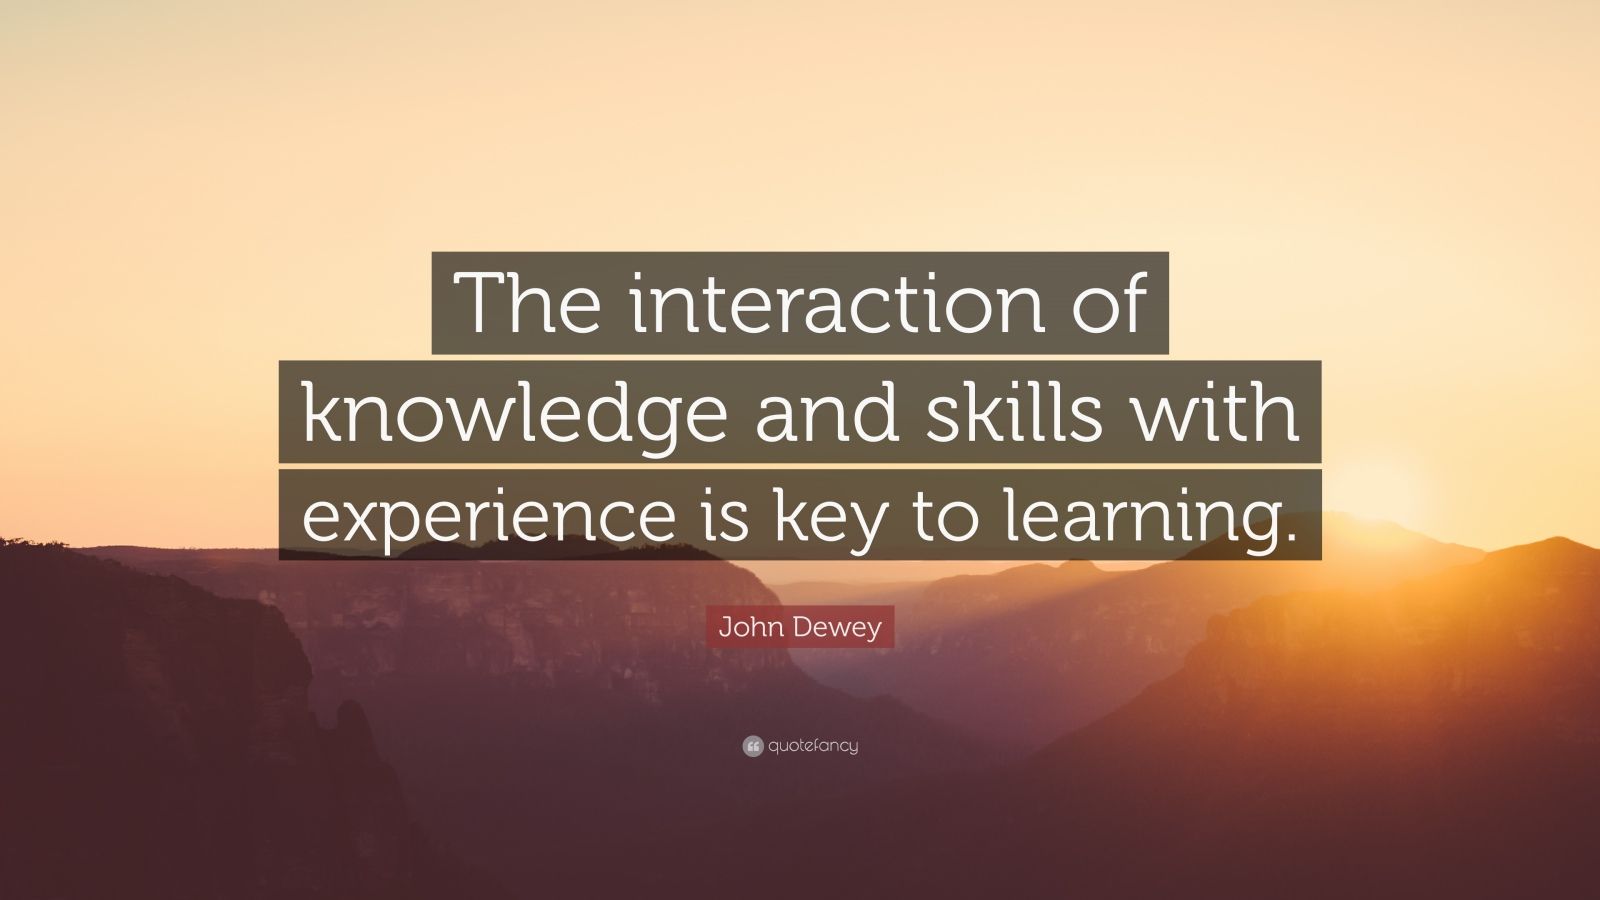 John Dewey Quote: “The interaction of knowledge and skills with